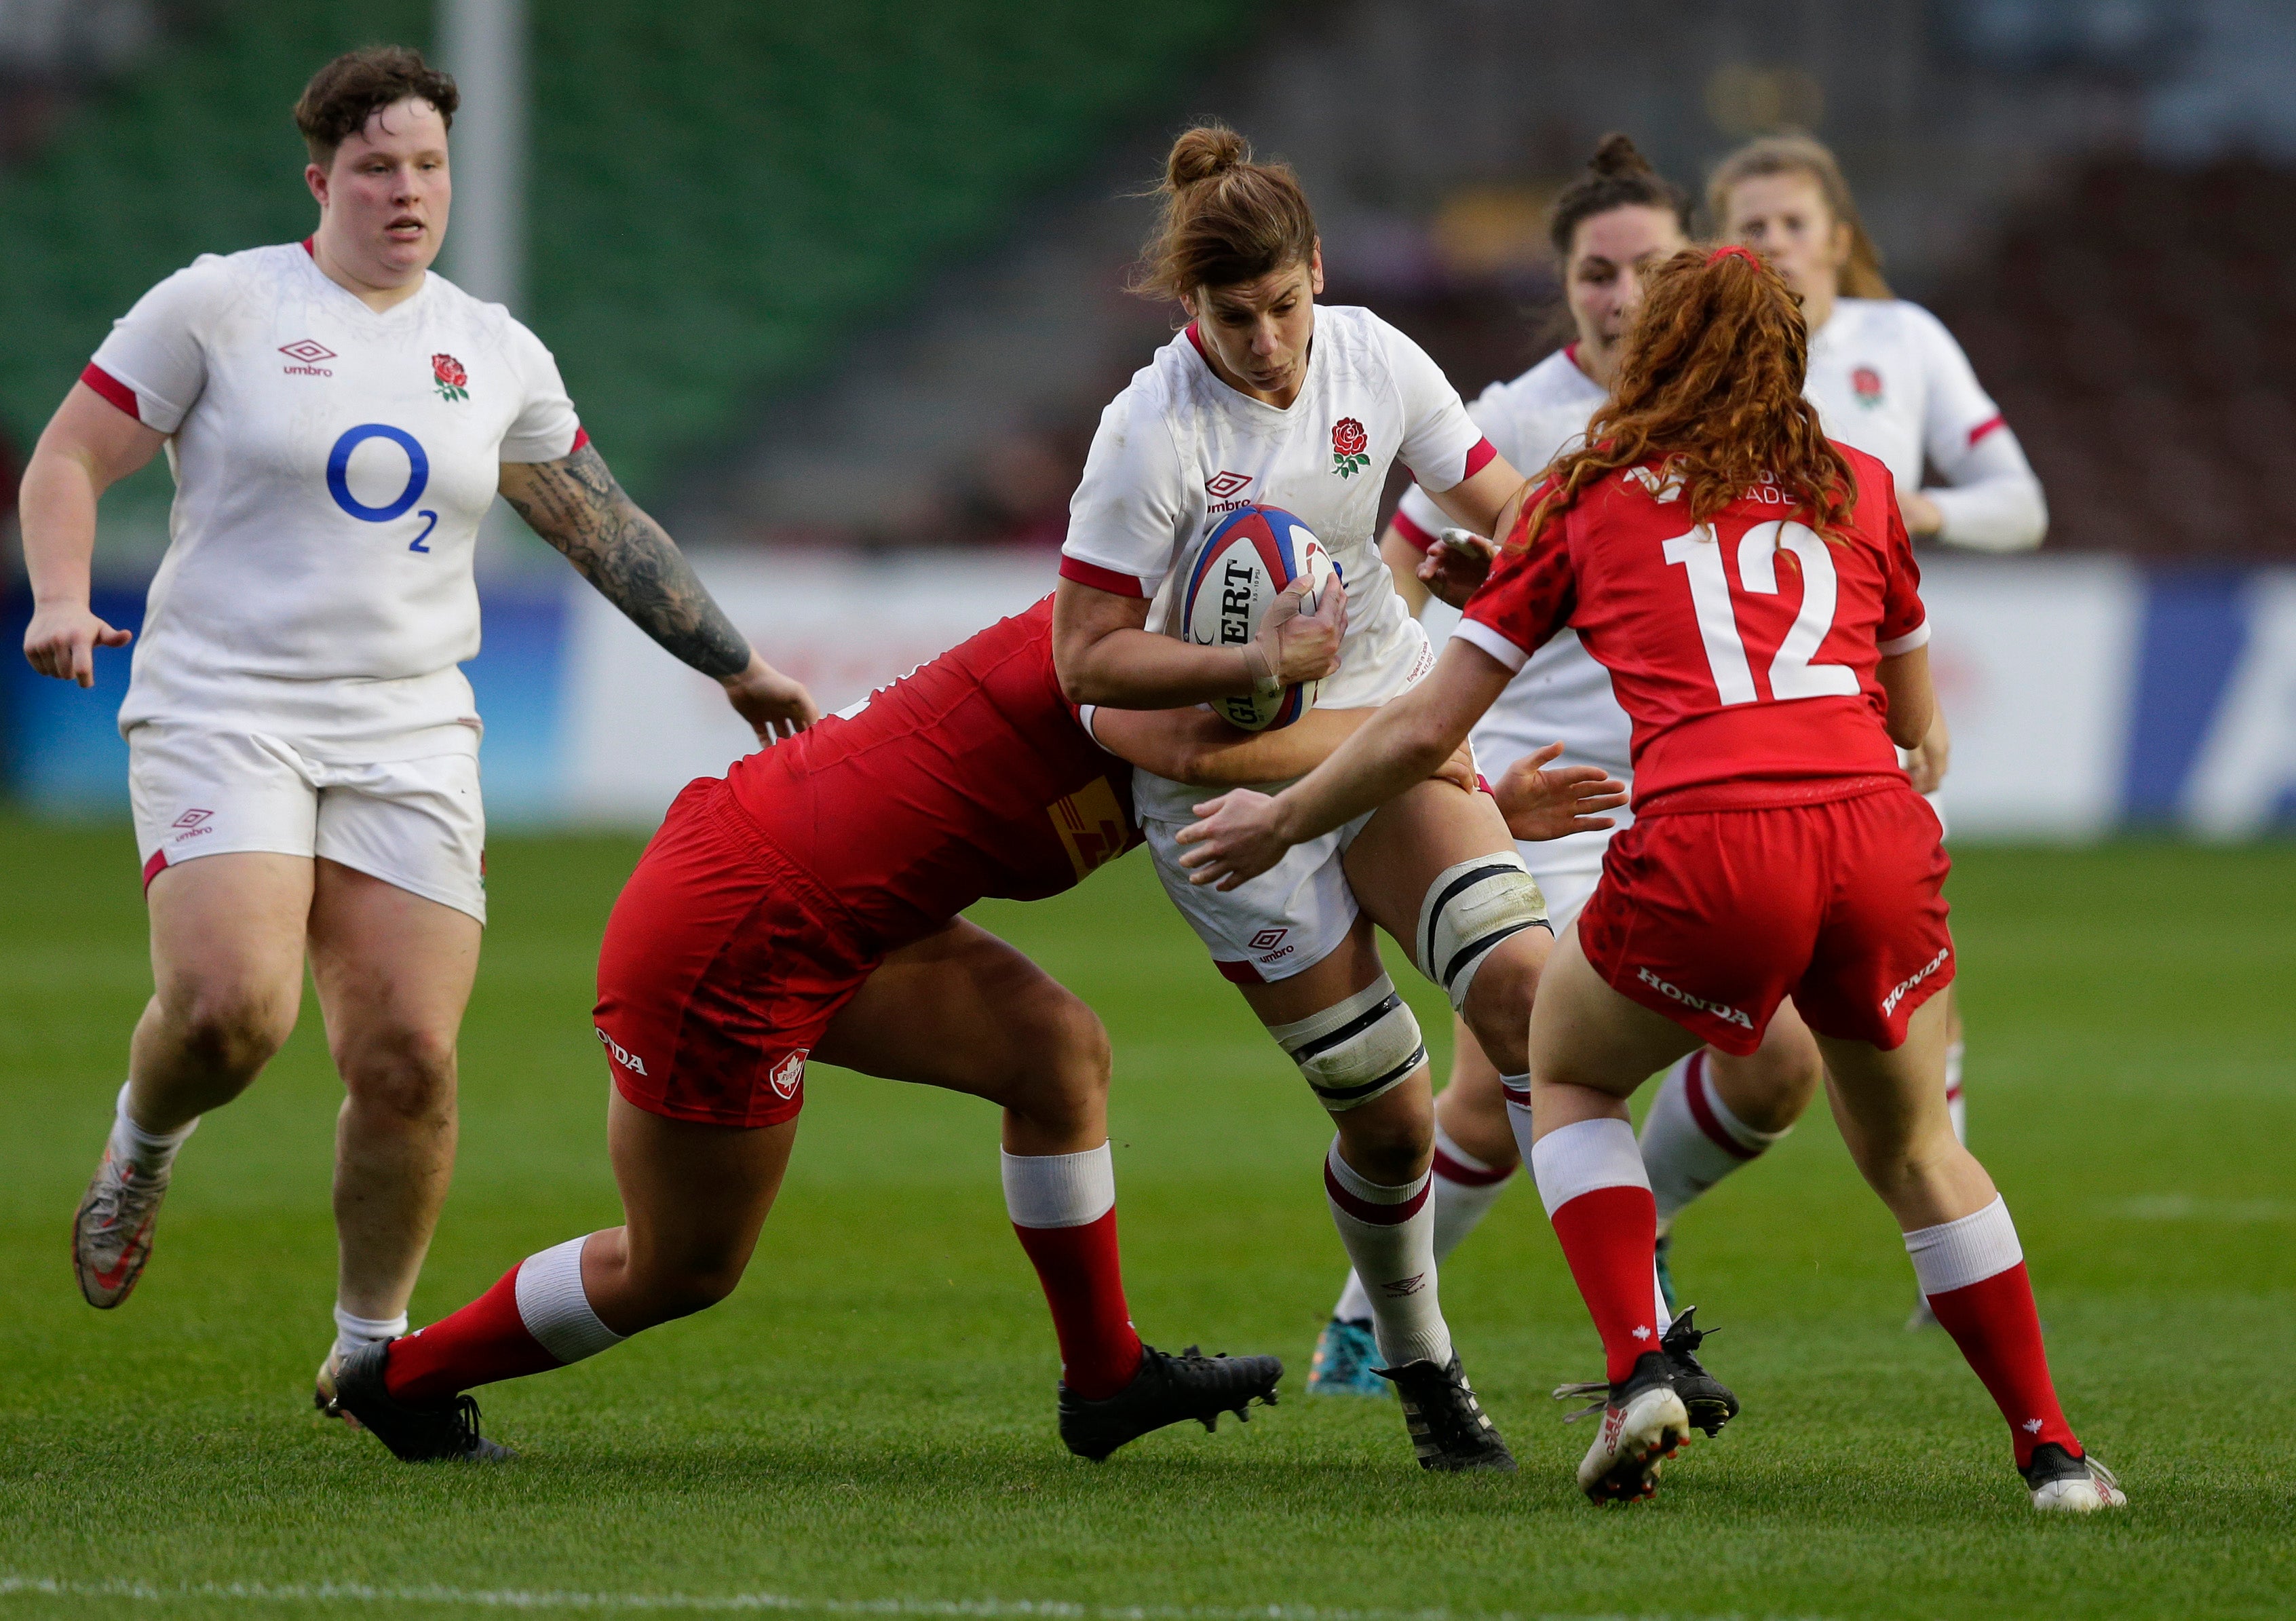 Sarah Hunter gets tackled during the Autumn International match against Canada